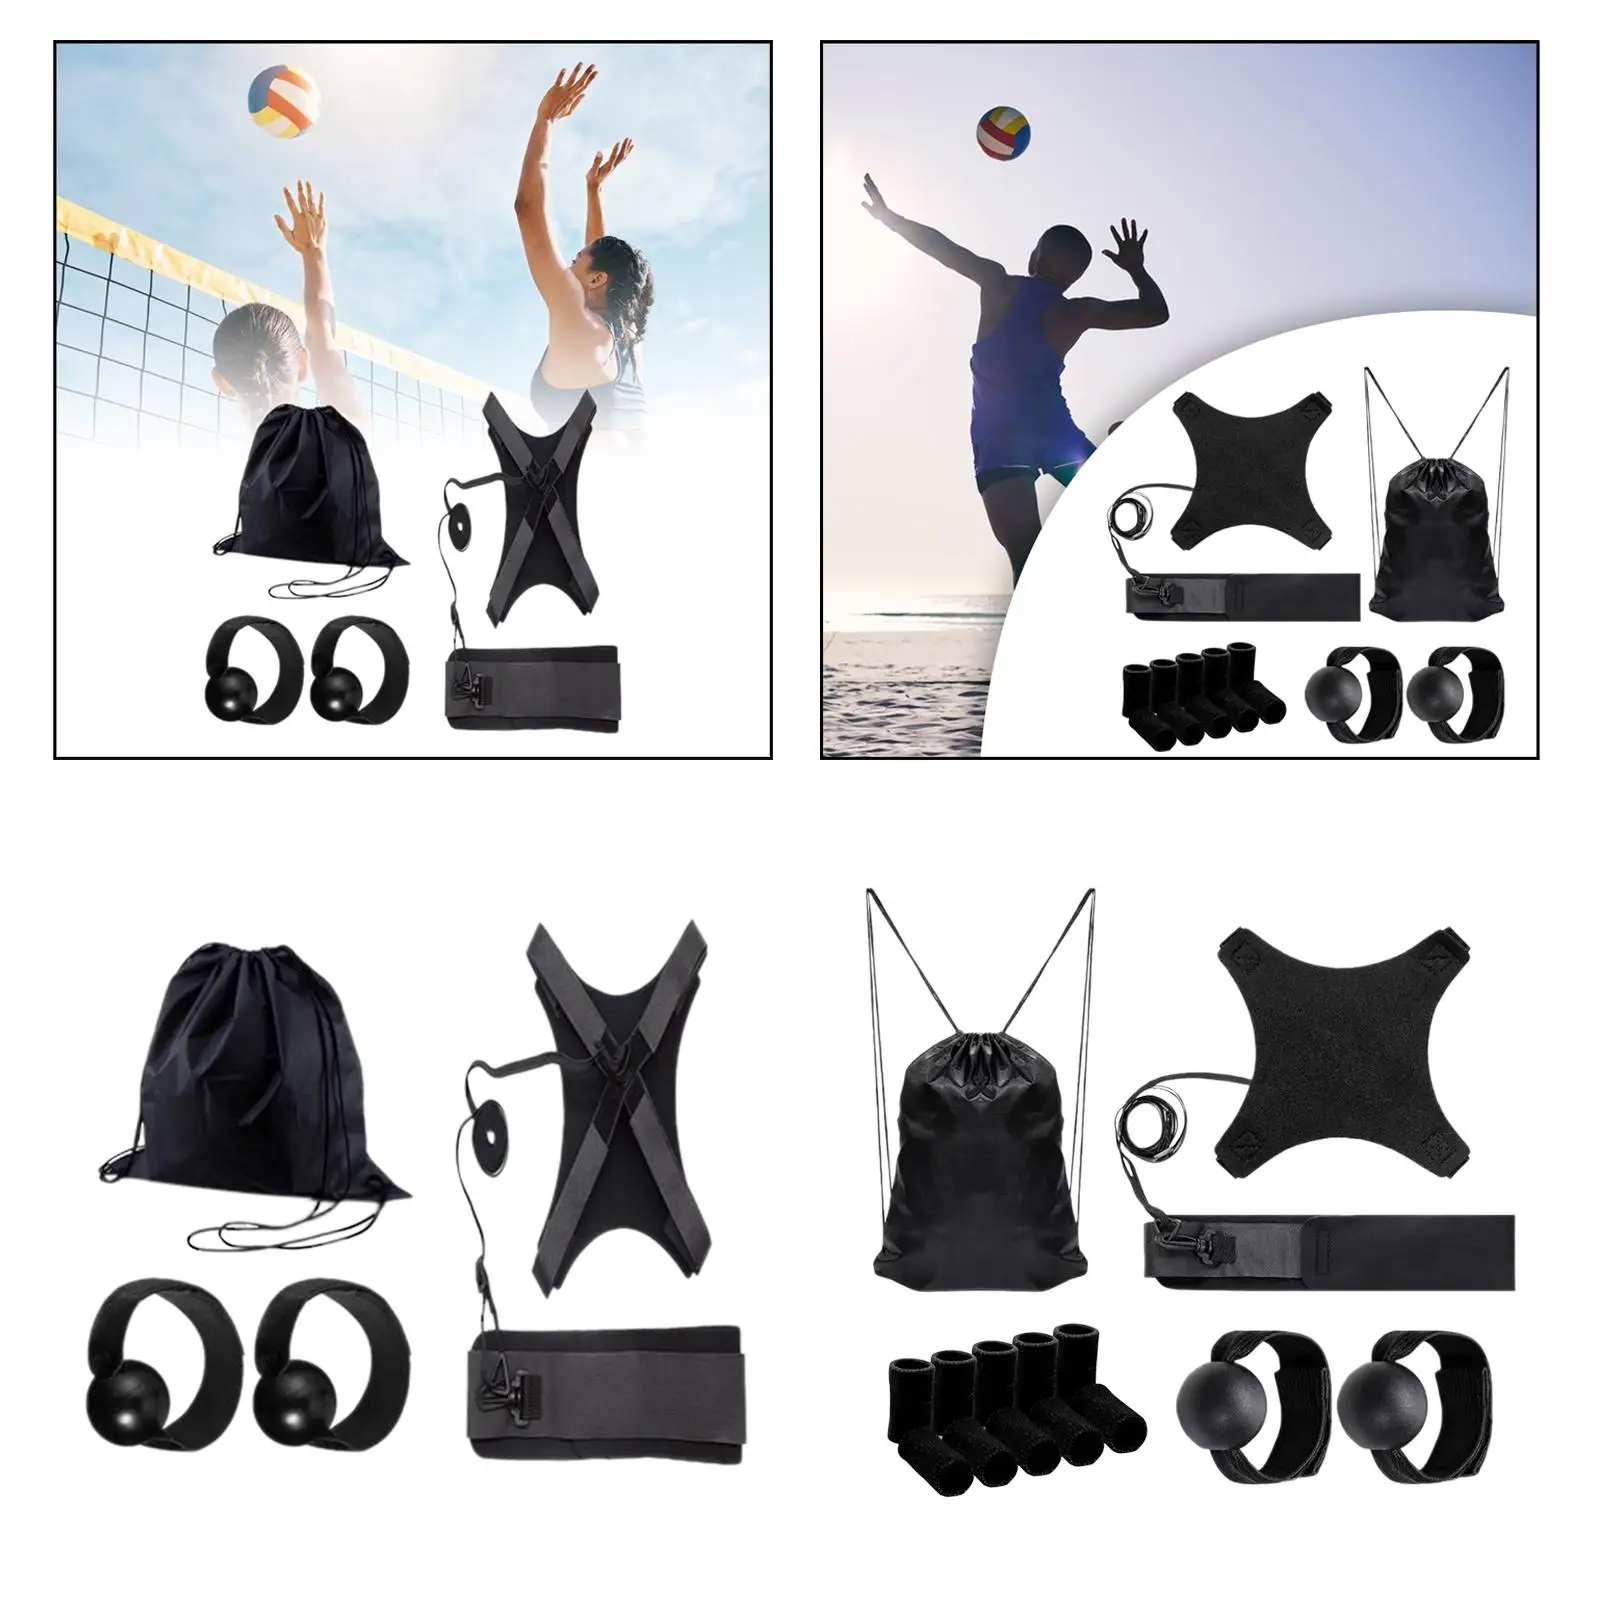 Volleyball Training Equipment Aid Volleyball Gifts for Girls Boys Solo Practice for Jumping Setting Practicing Spiking Arm Swing